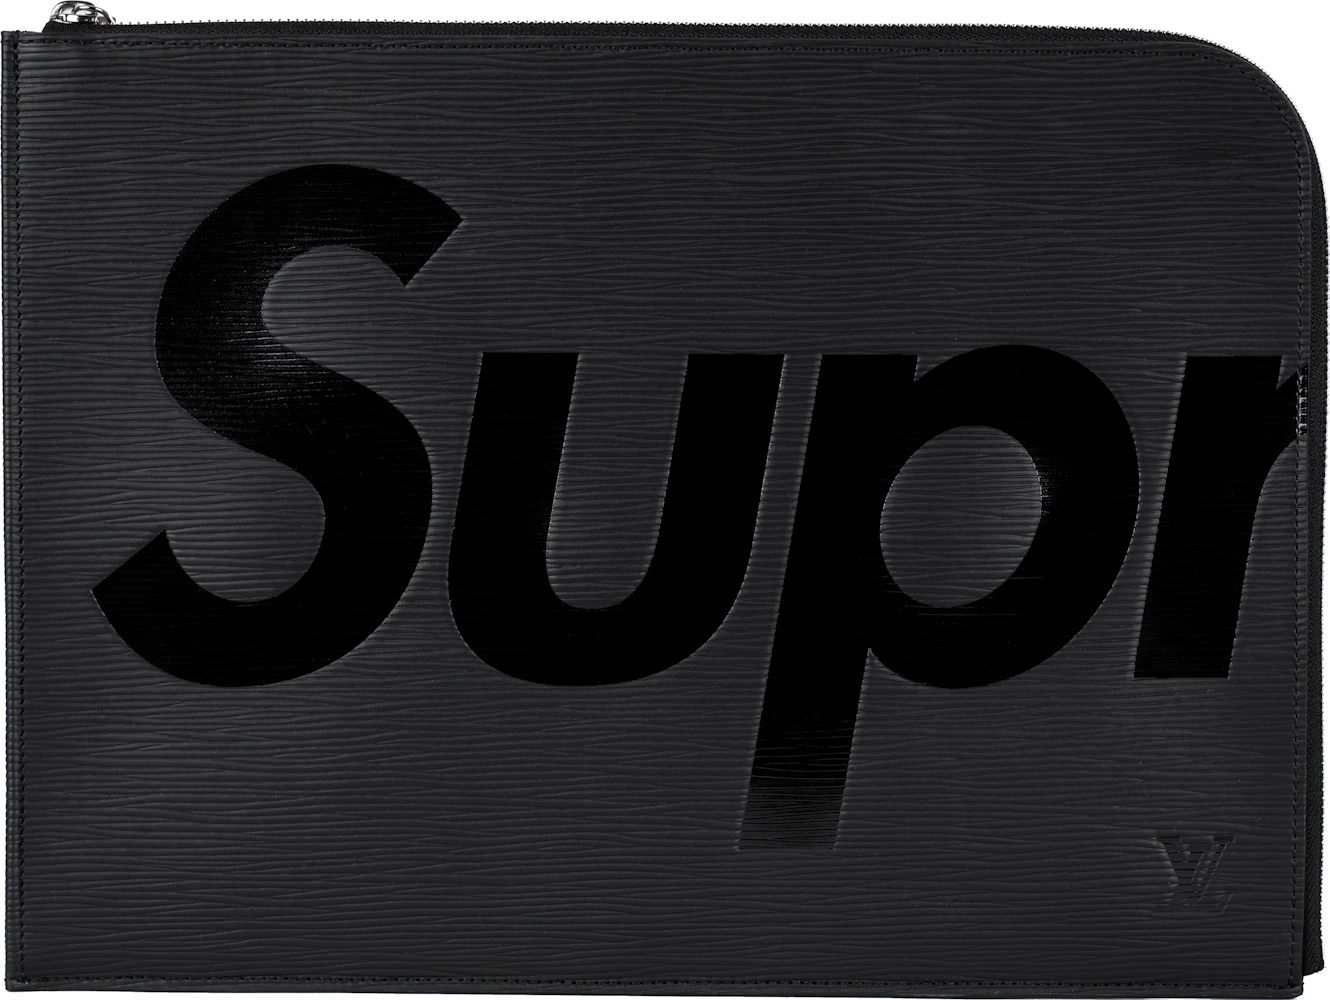 The Supreme x Louis Vuitton Bags are available for pre-order